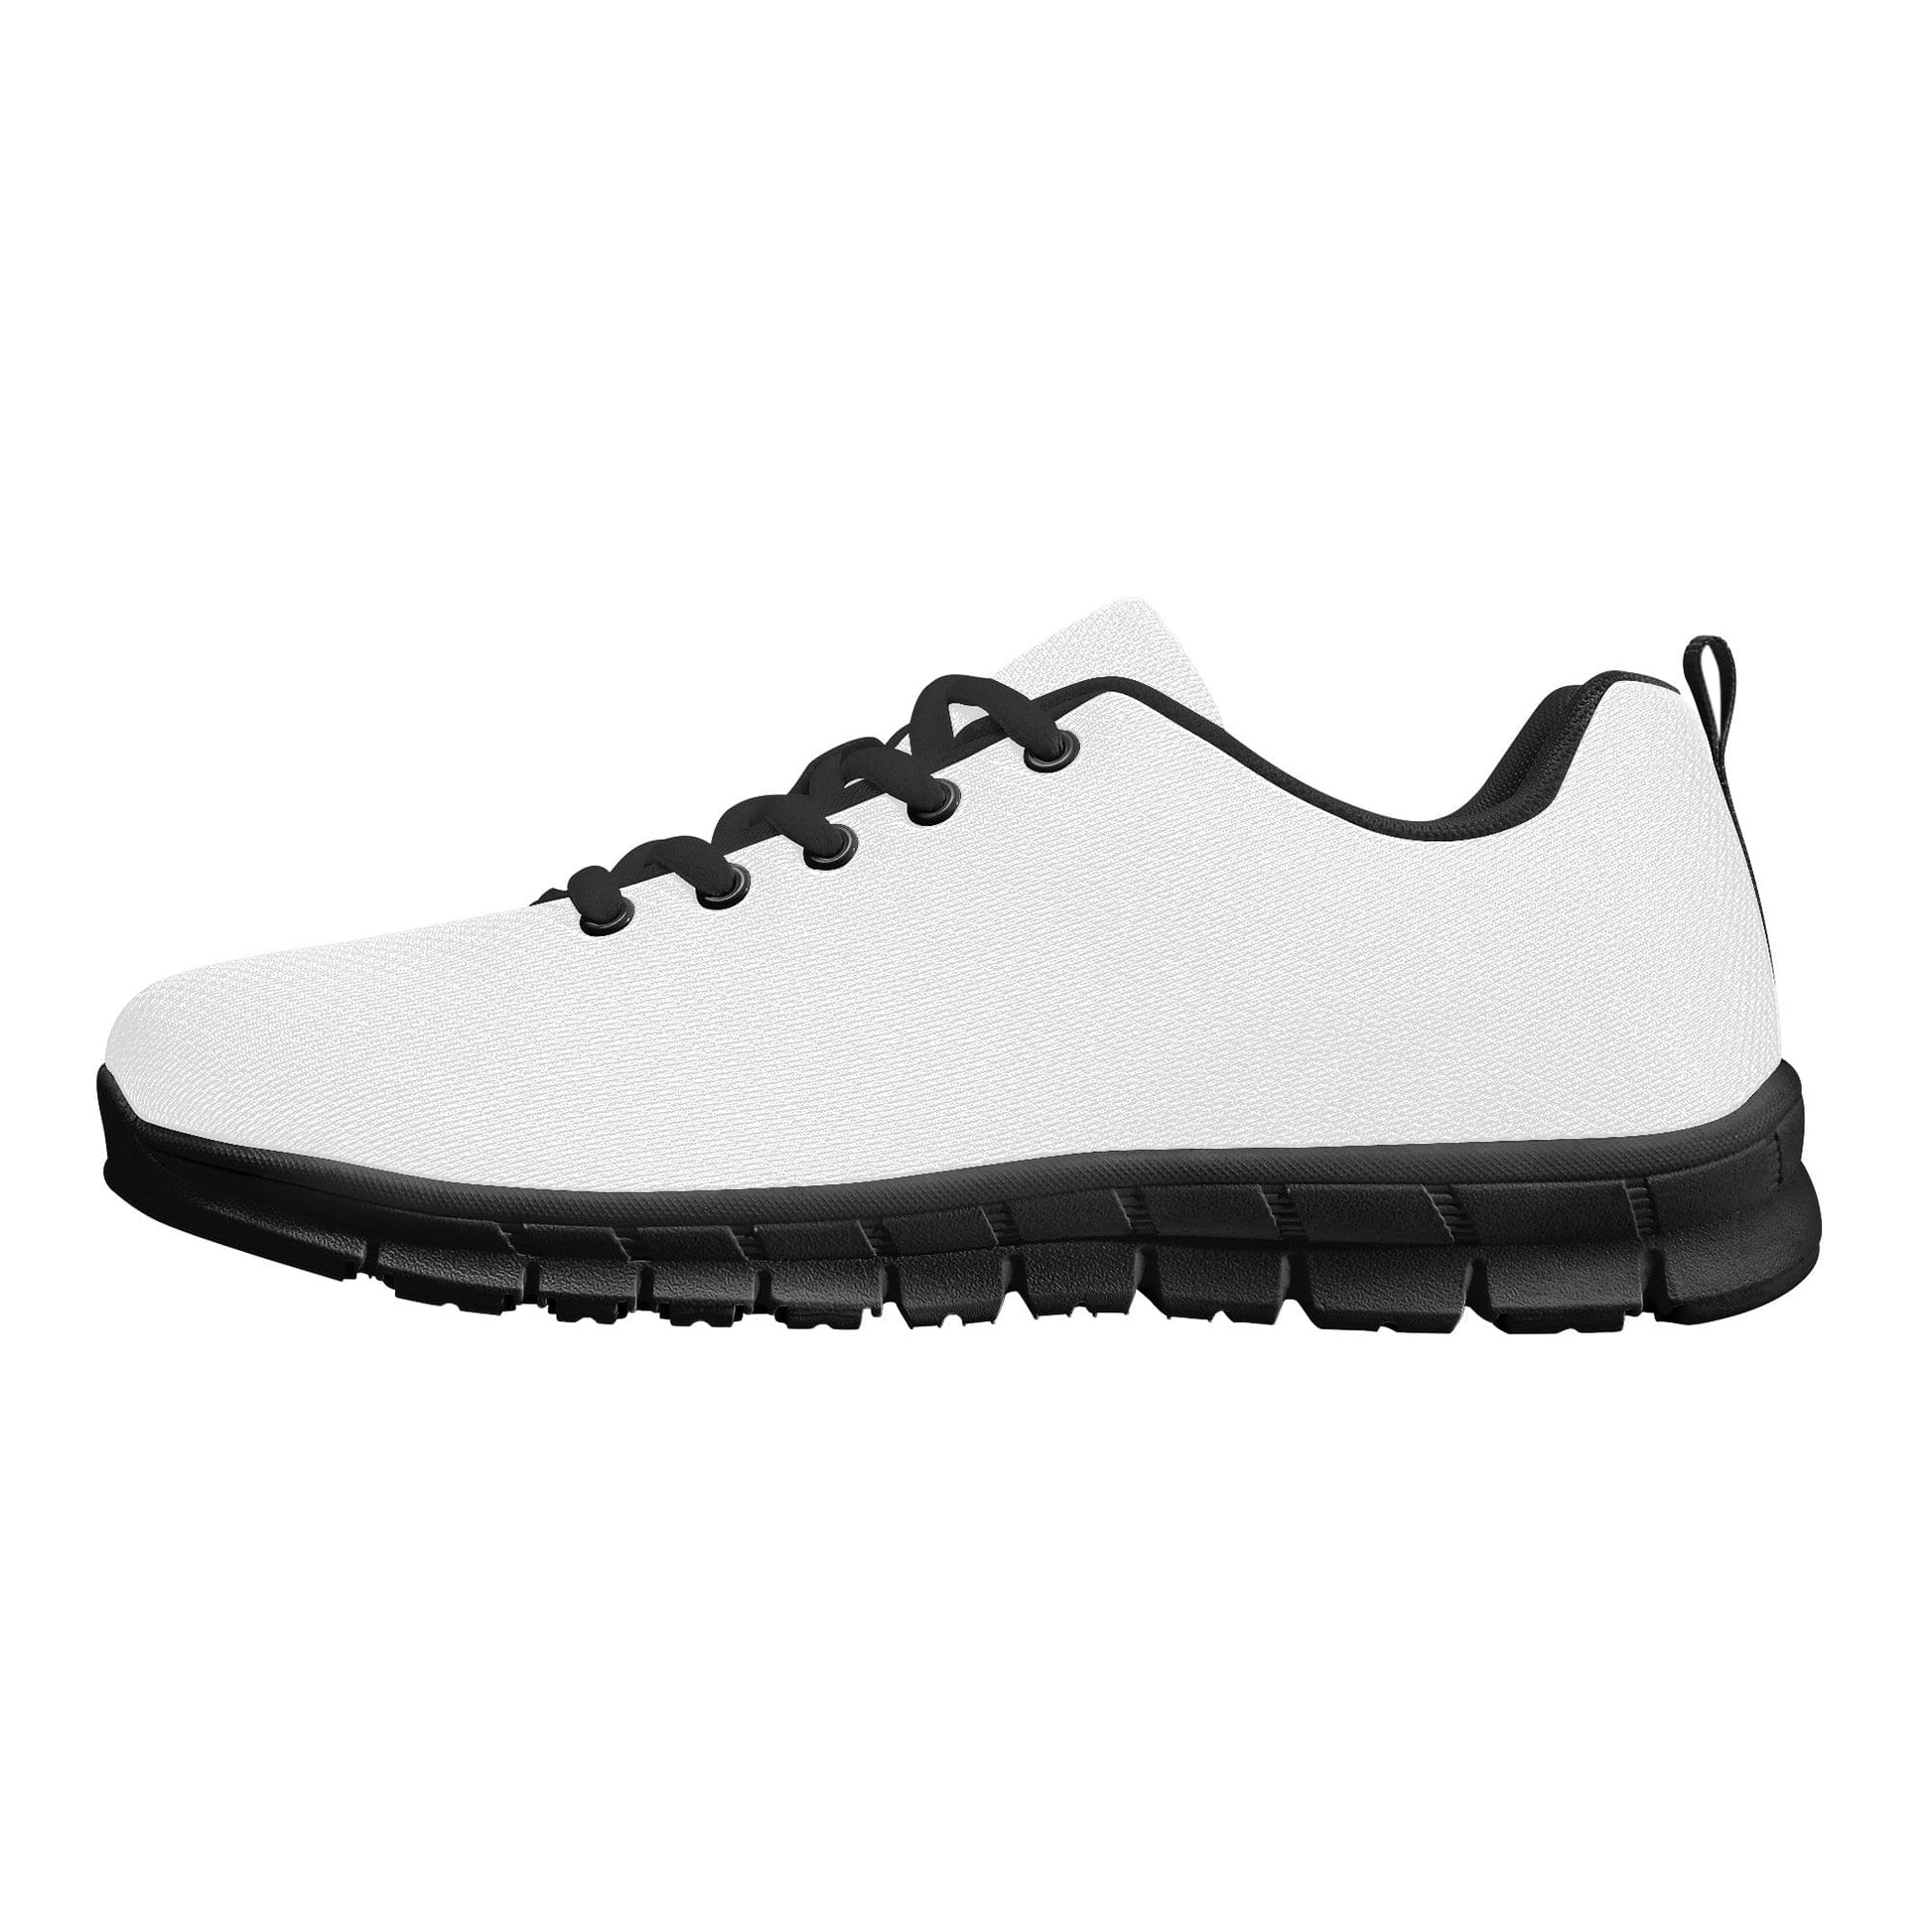 Custom Running Shoes - Black D23 Colloid Colors 